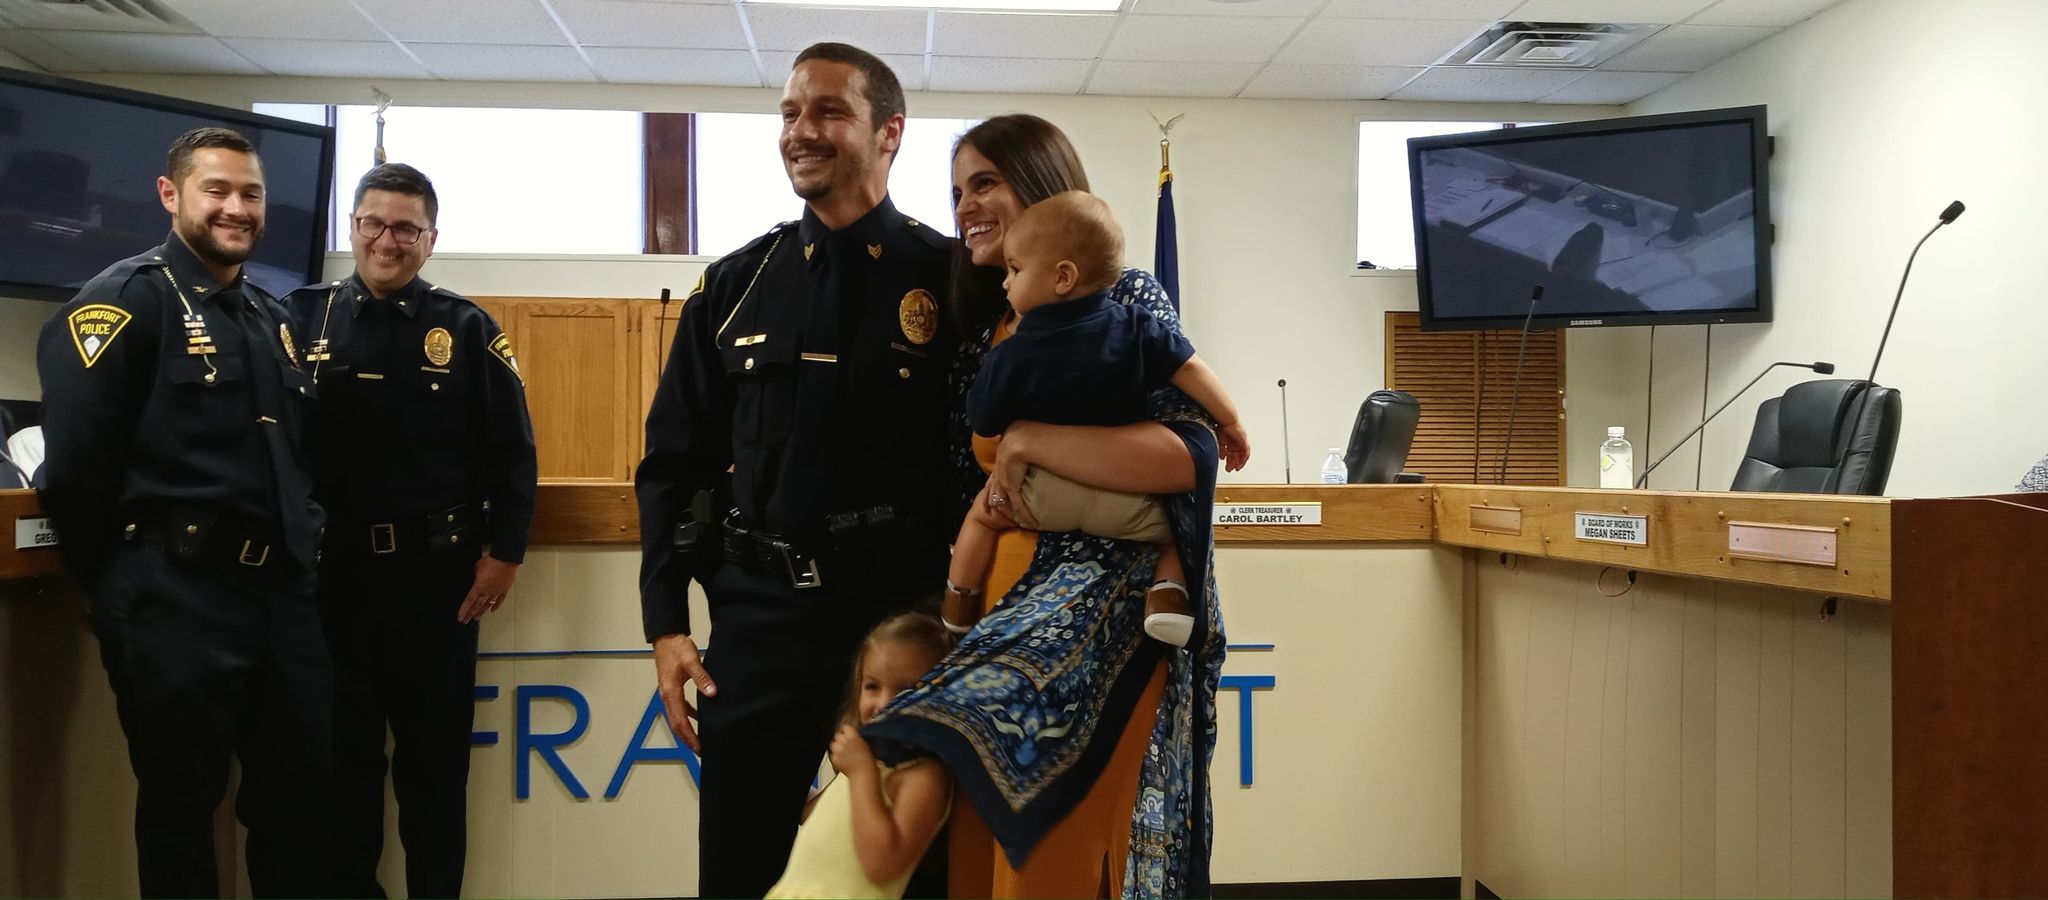 Sergeant Brett Dale stands with family after being promoted to Sergeant